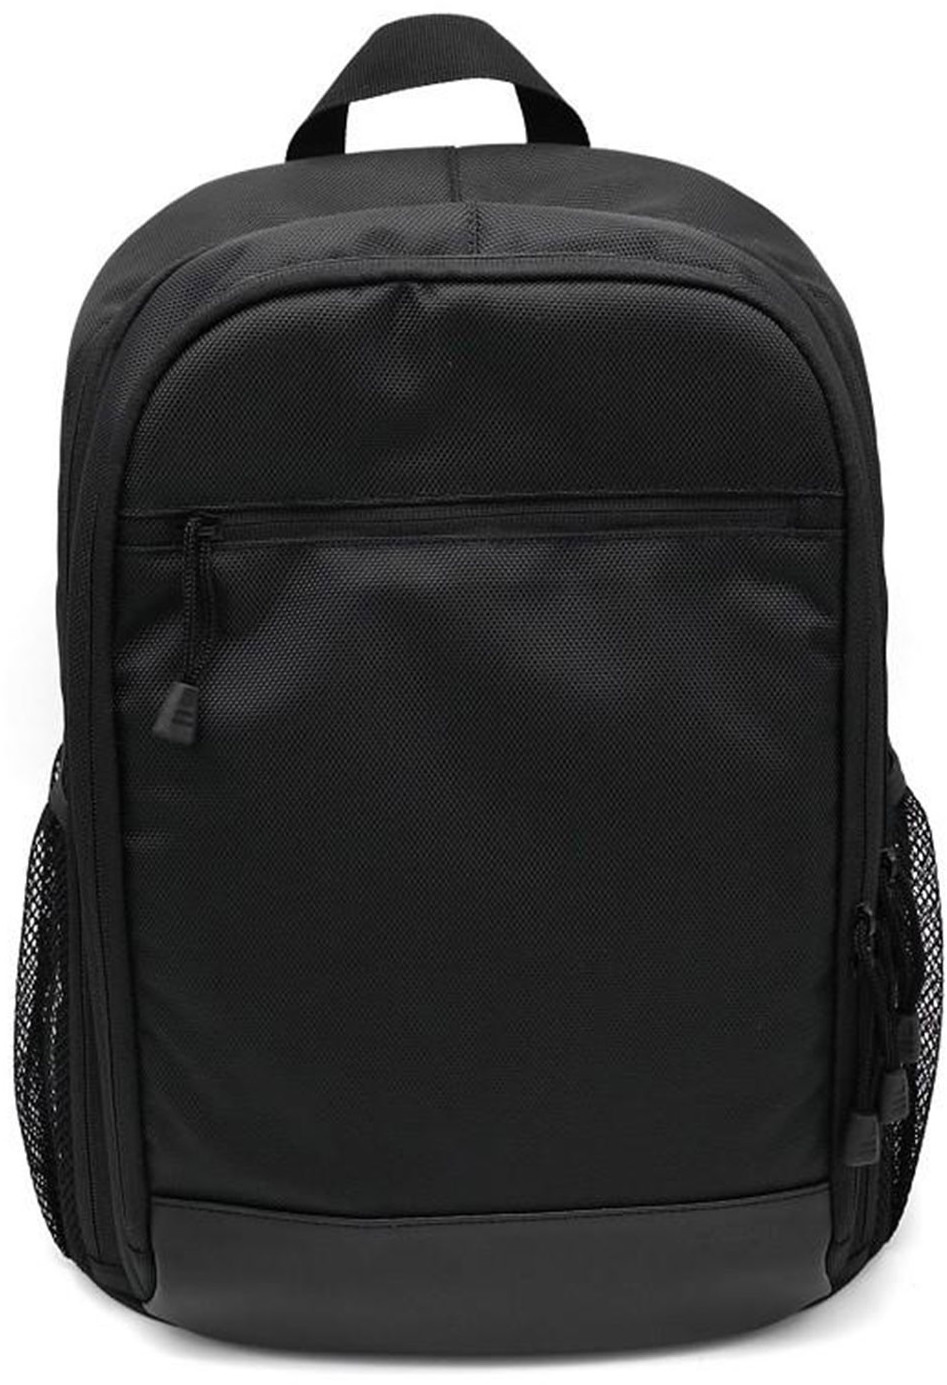 Canon Backpack BP110